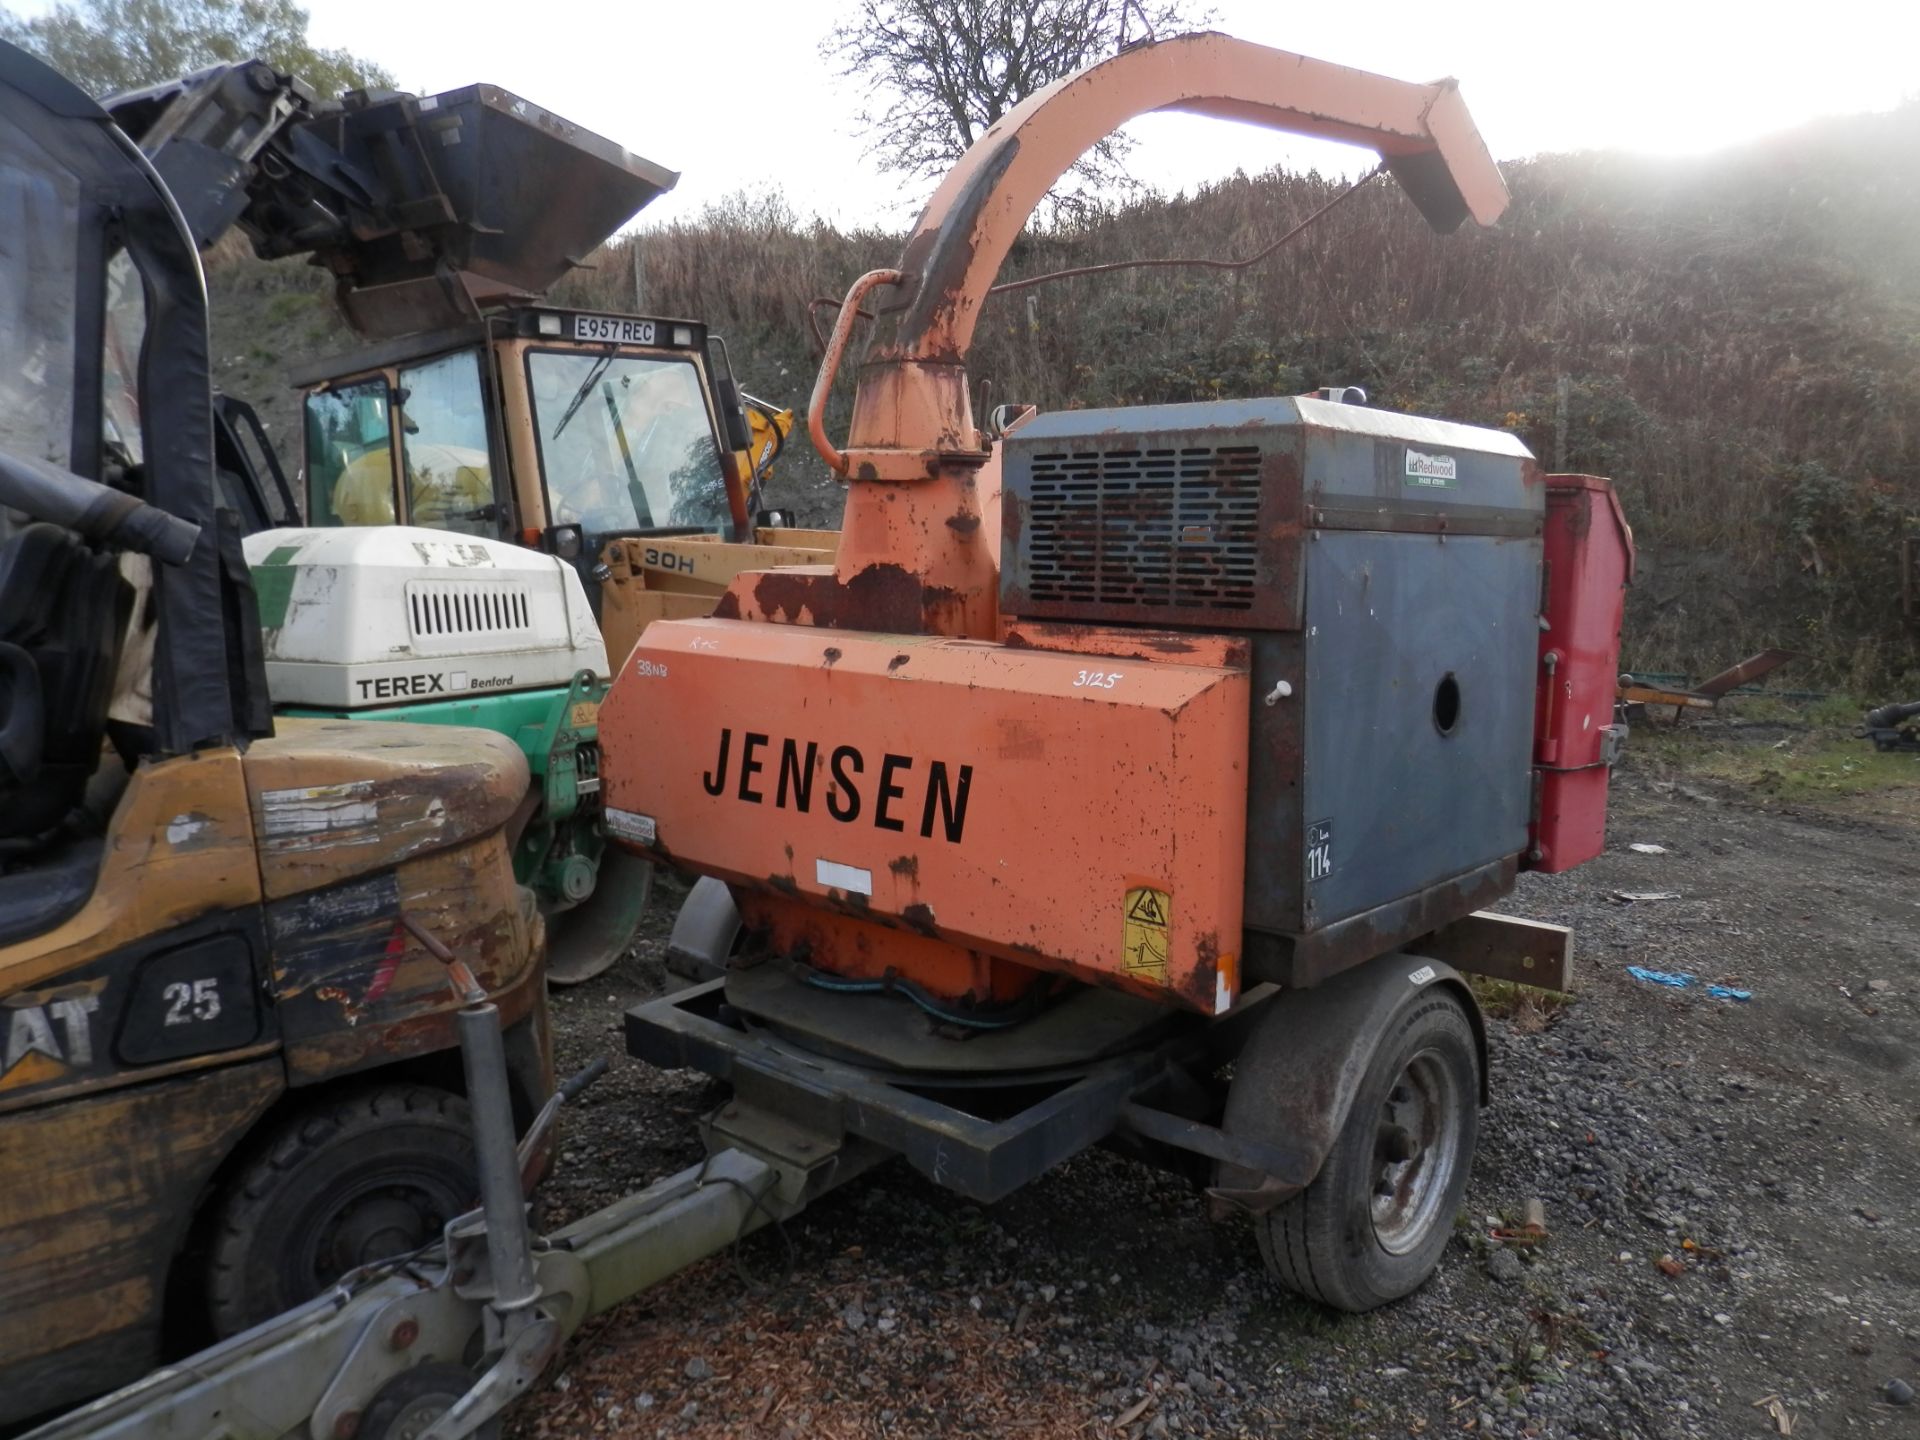 DS - QUALITY 2004 JENSEN DIESEL TURNTABLE CHIPPER, GOOD WORKING ORDER   GOOD WORKING QUALITY TRAILER - Image 7 of 7